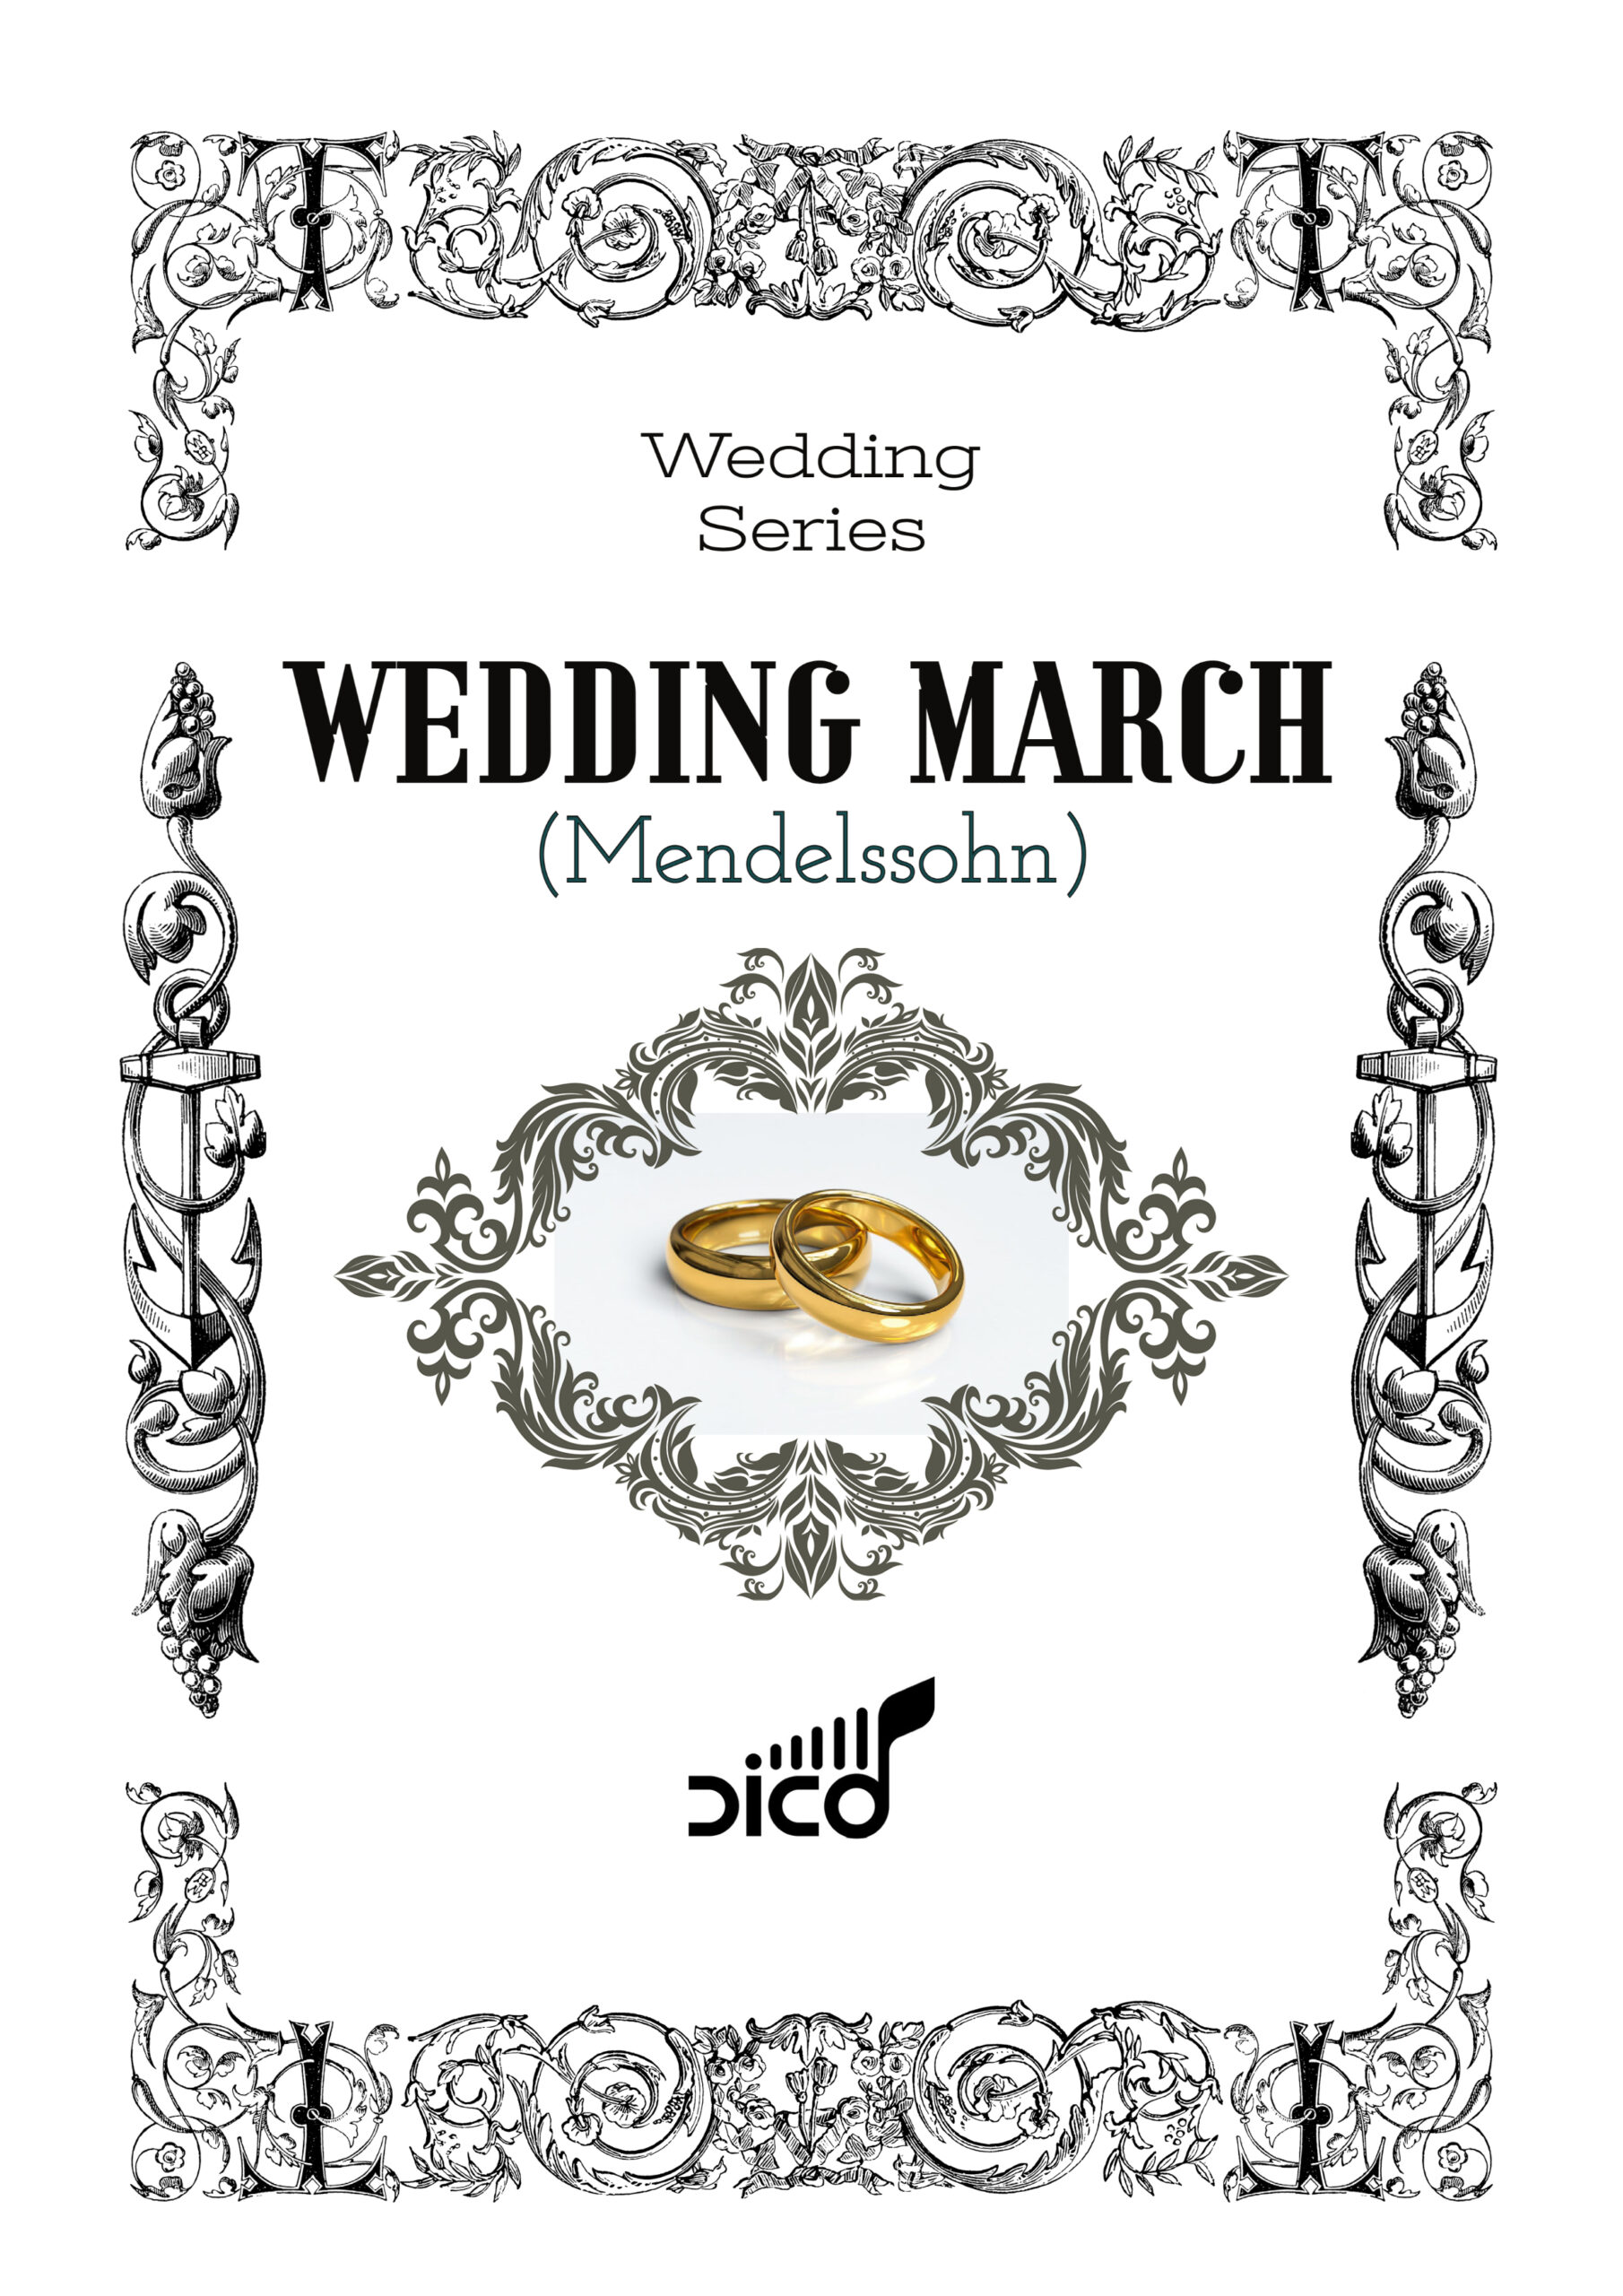 WEDDING MARCH web cover My Score scaled